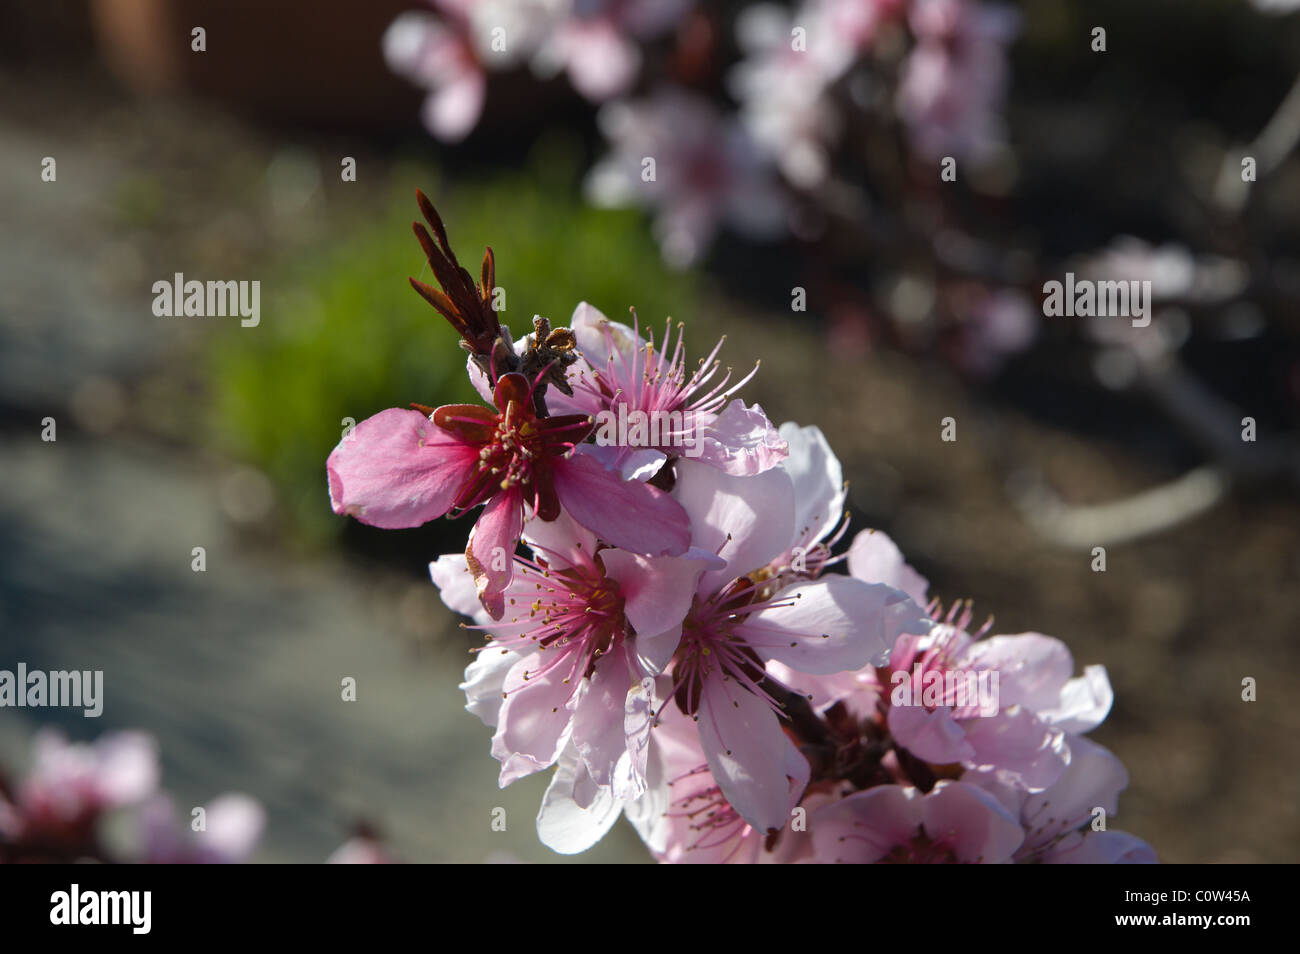 Cherry Blossoms in spring at Raulston Arboretum, Raleigh, NC USA Stock Photo